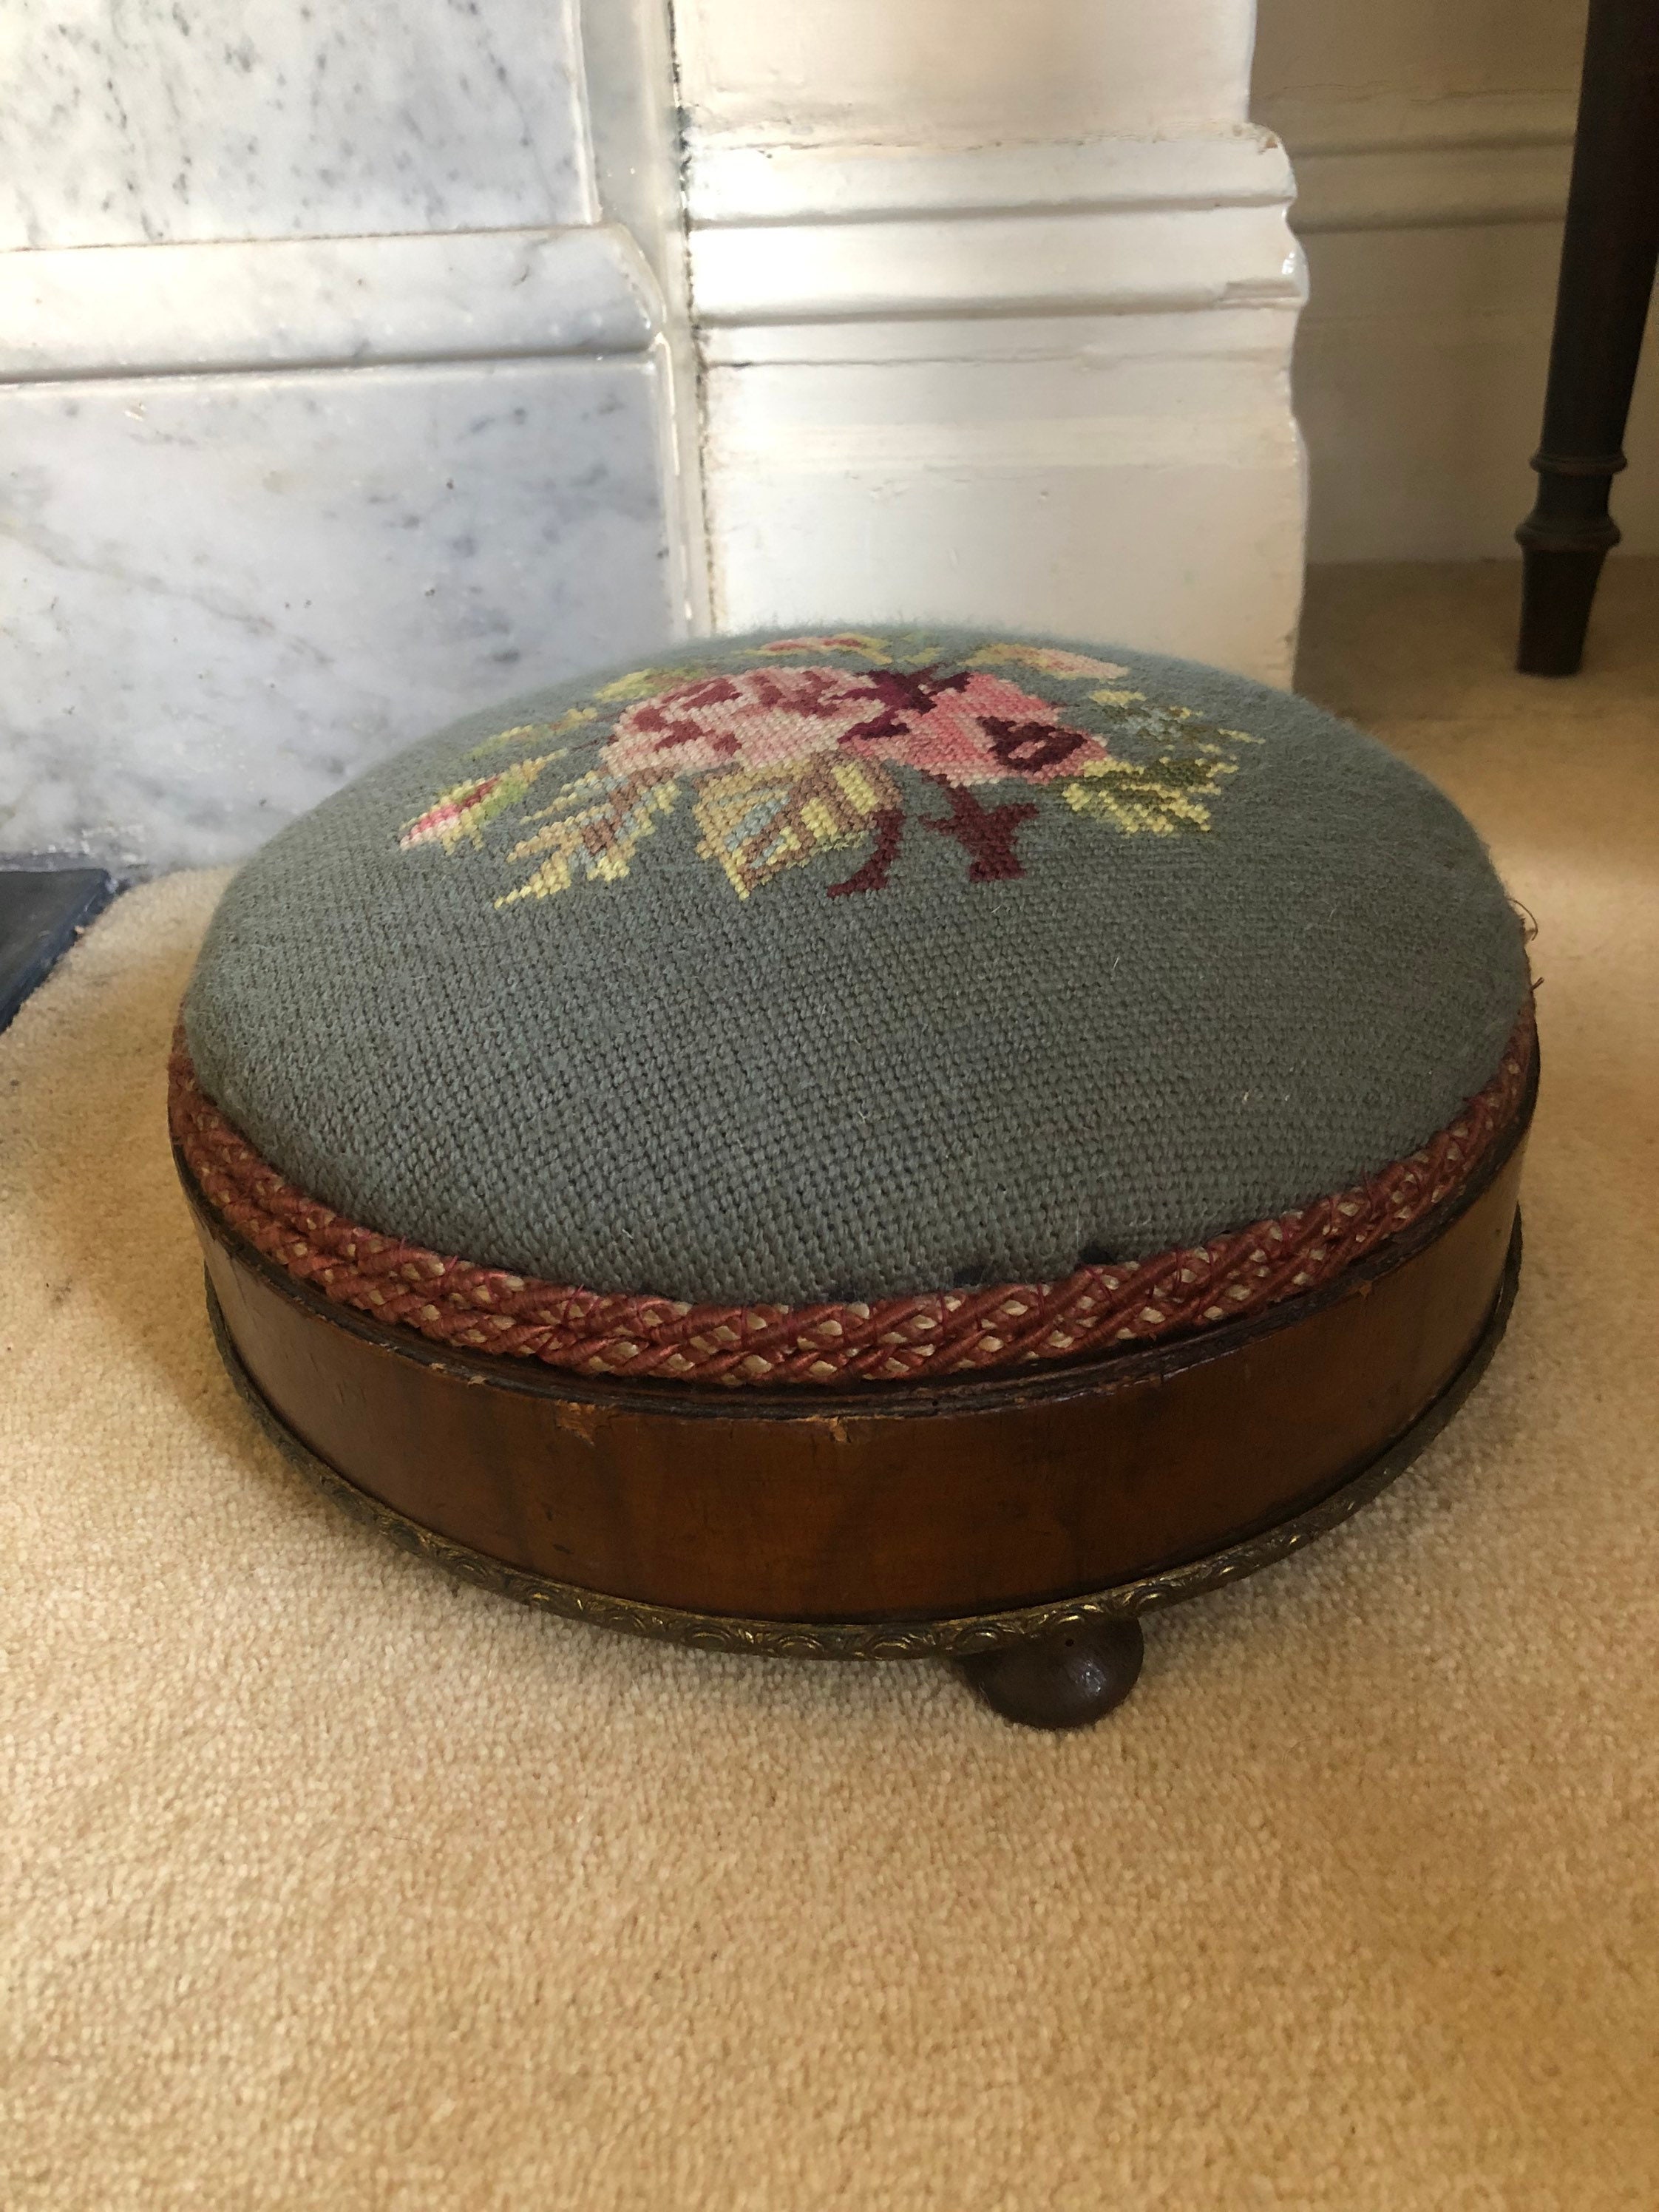 Satin Floral Small Footstool With Wooden Feet / Upholstered Handmade Stool  Bed Step Footrest Mum Dad Gift Home Office Under Chair Foot Stool 